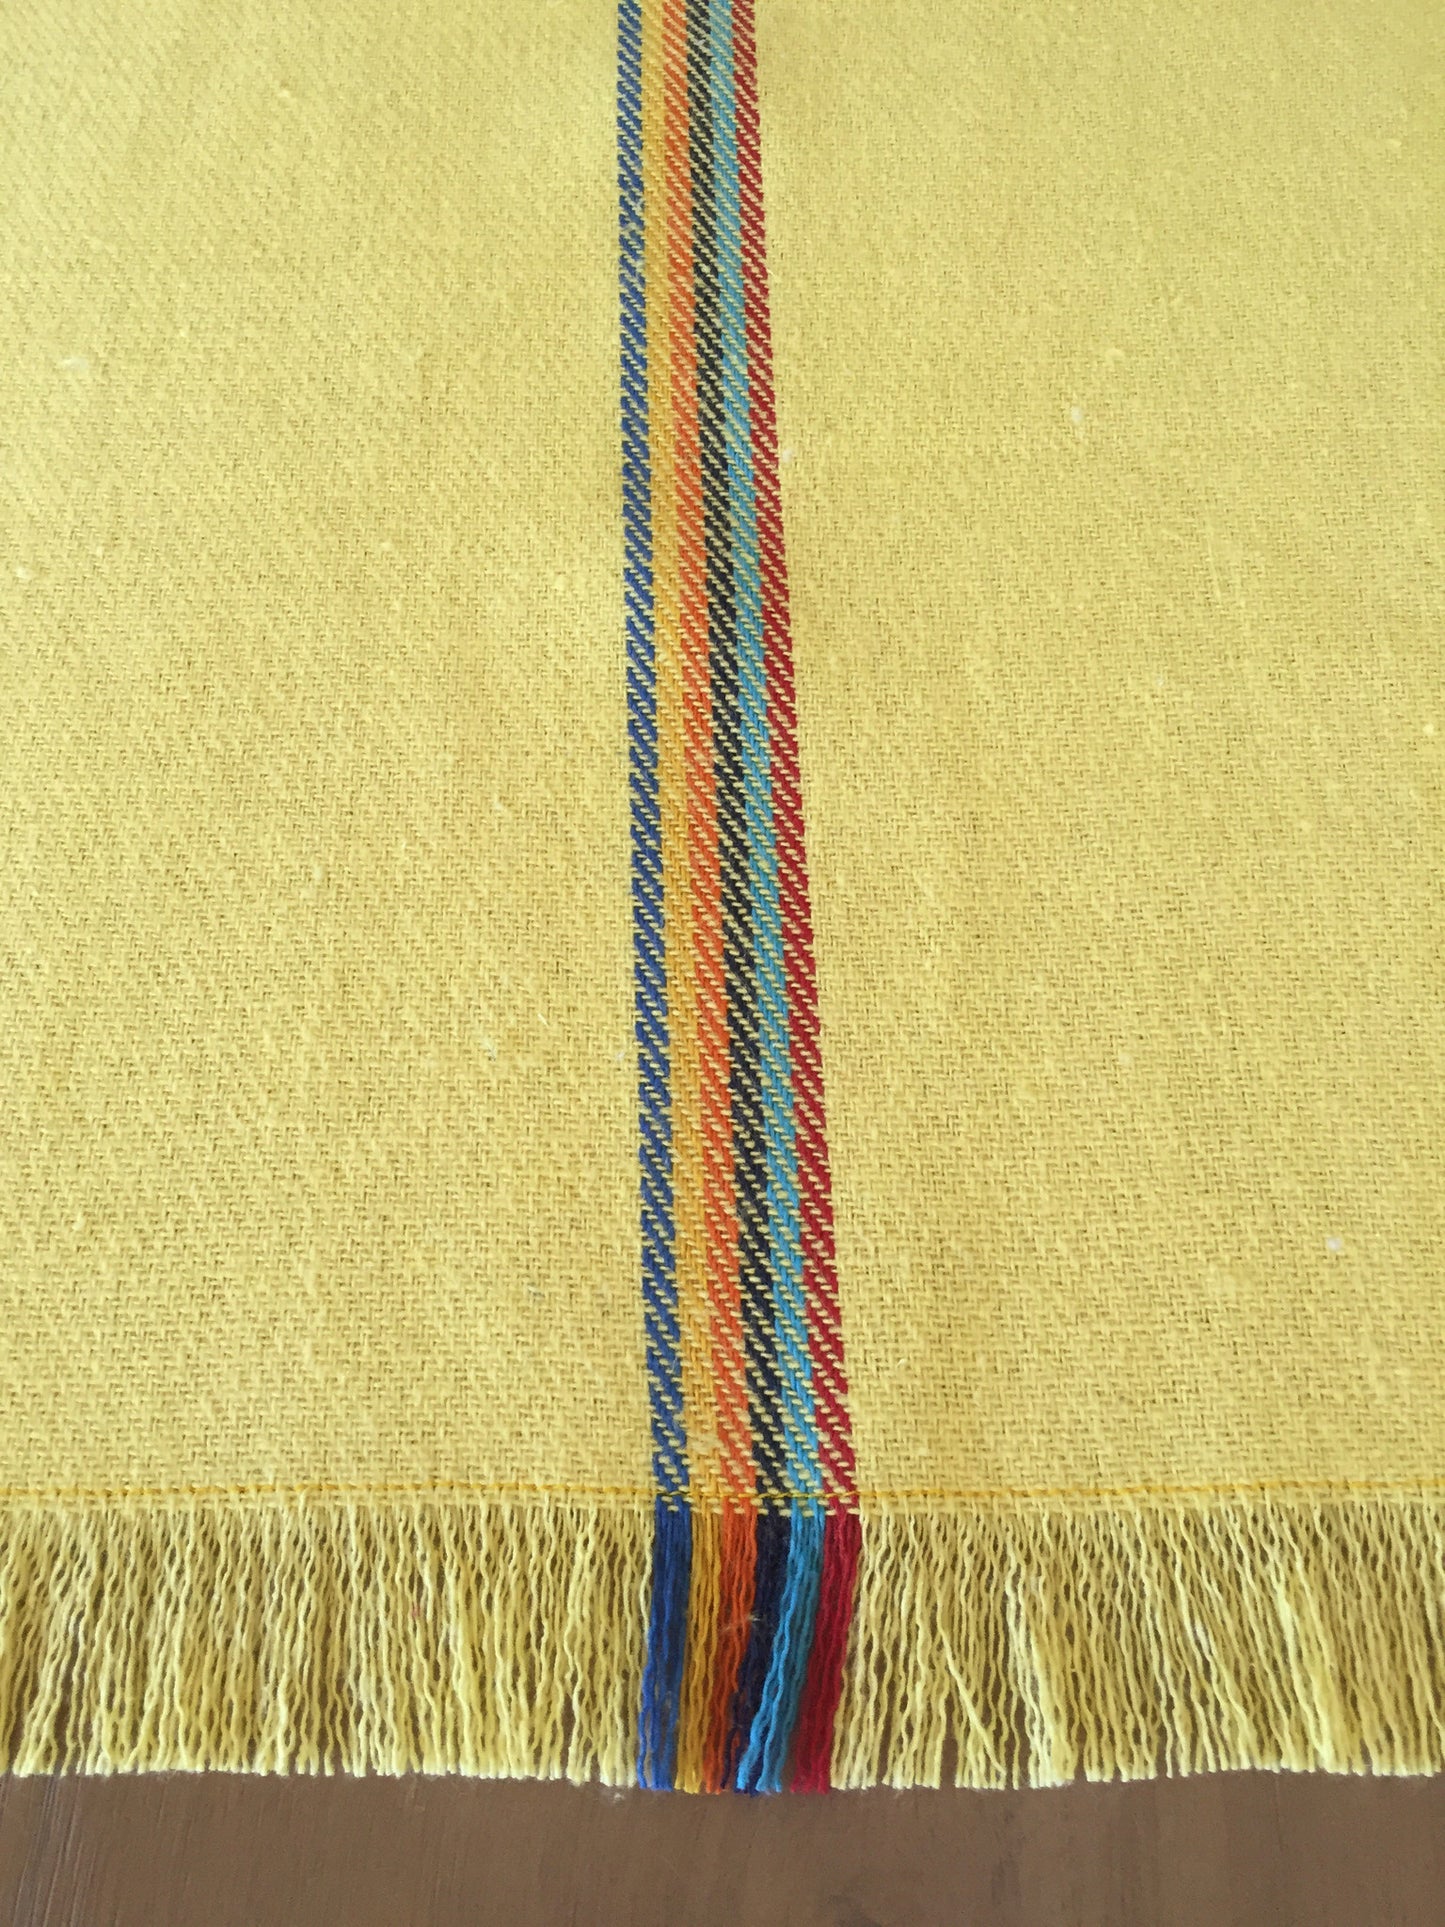 Mexican yellow jerga table runner - MesaChic - 2